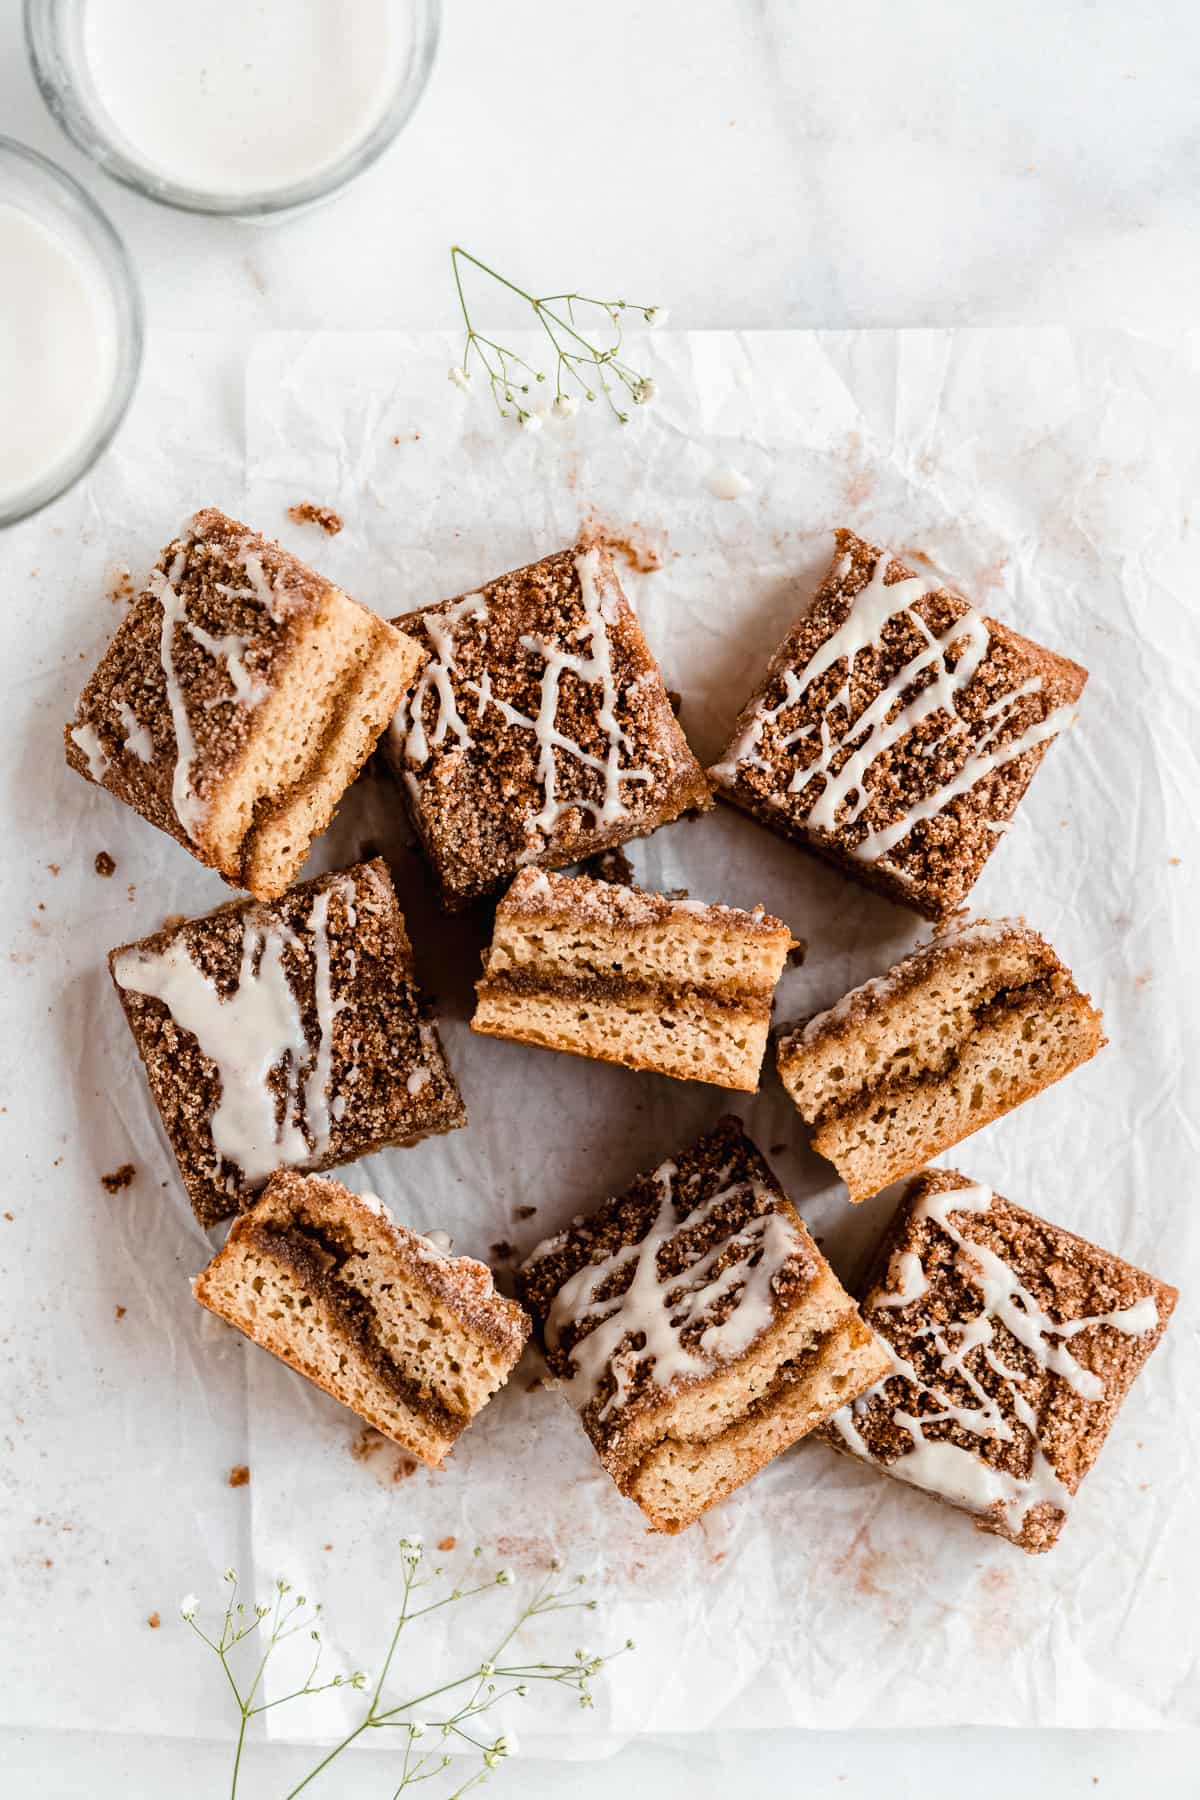 Overhead photo of freshly baked Paleo Almond Flour Coffee Cake that has been cut into squares and arranged on parchment paper on a marble slab.  Two glasses of milk can be seen in the background.  